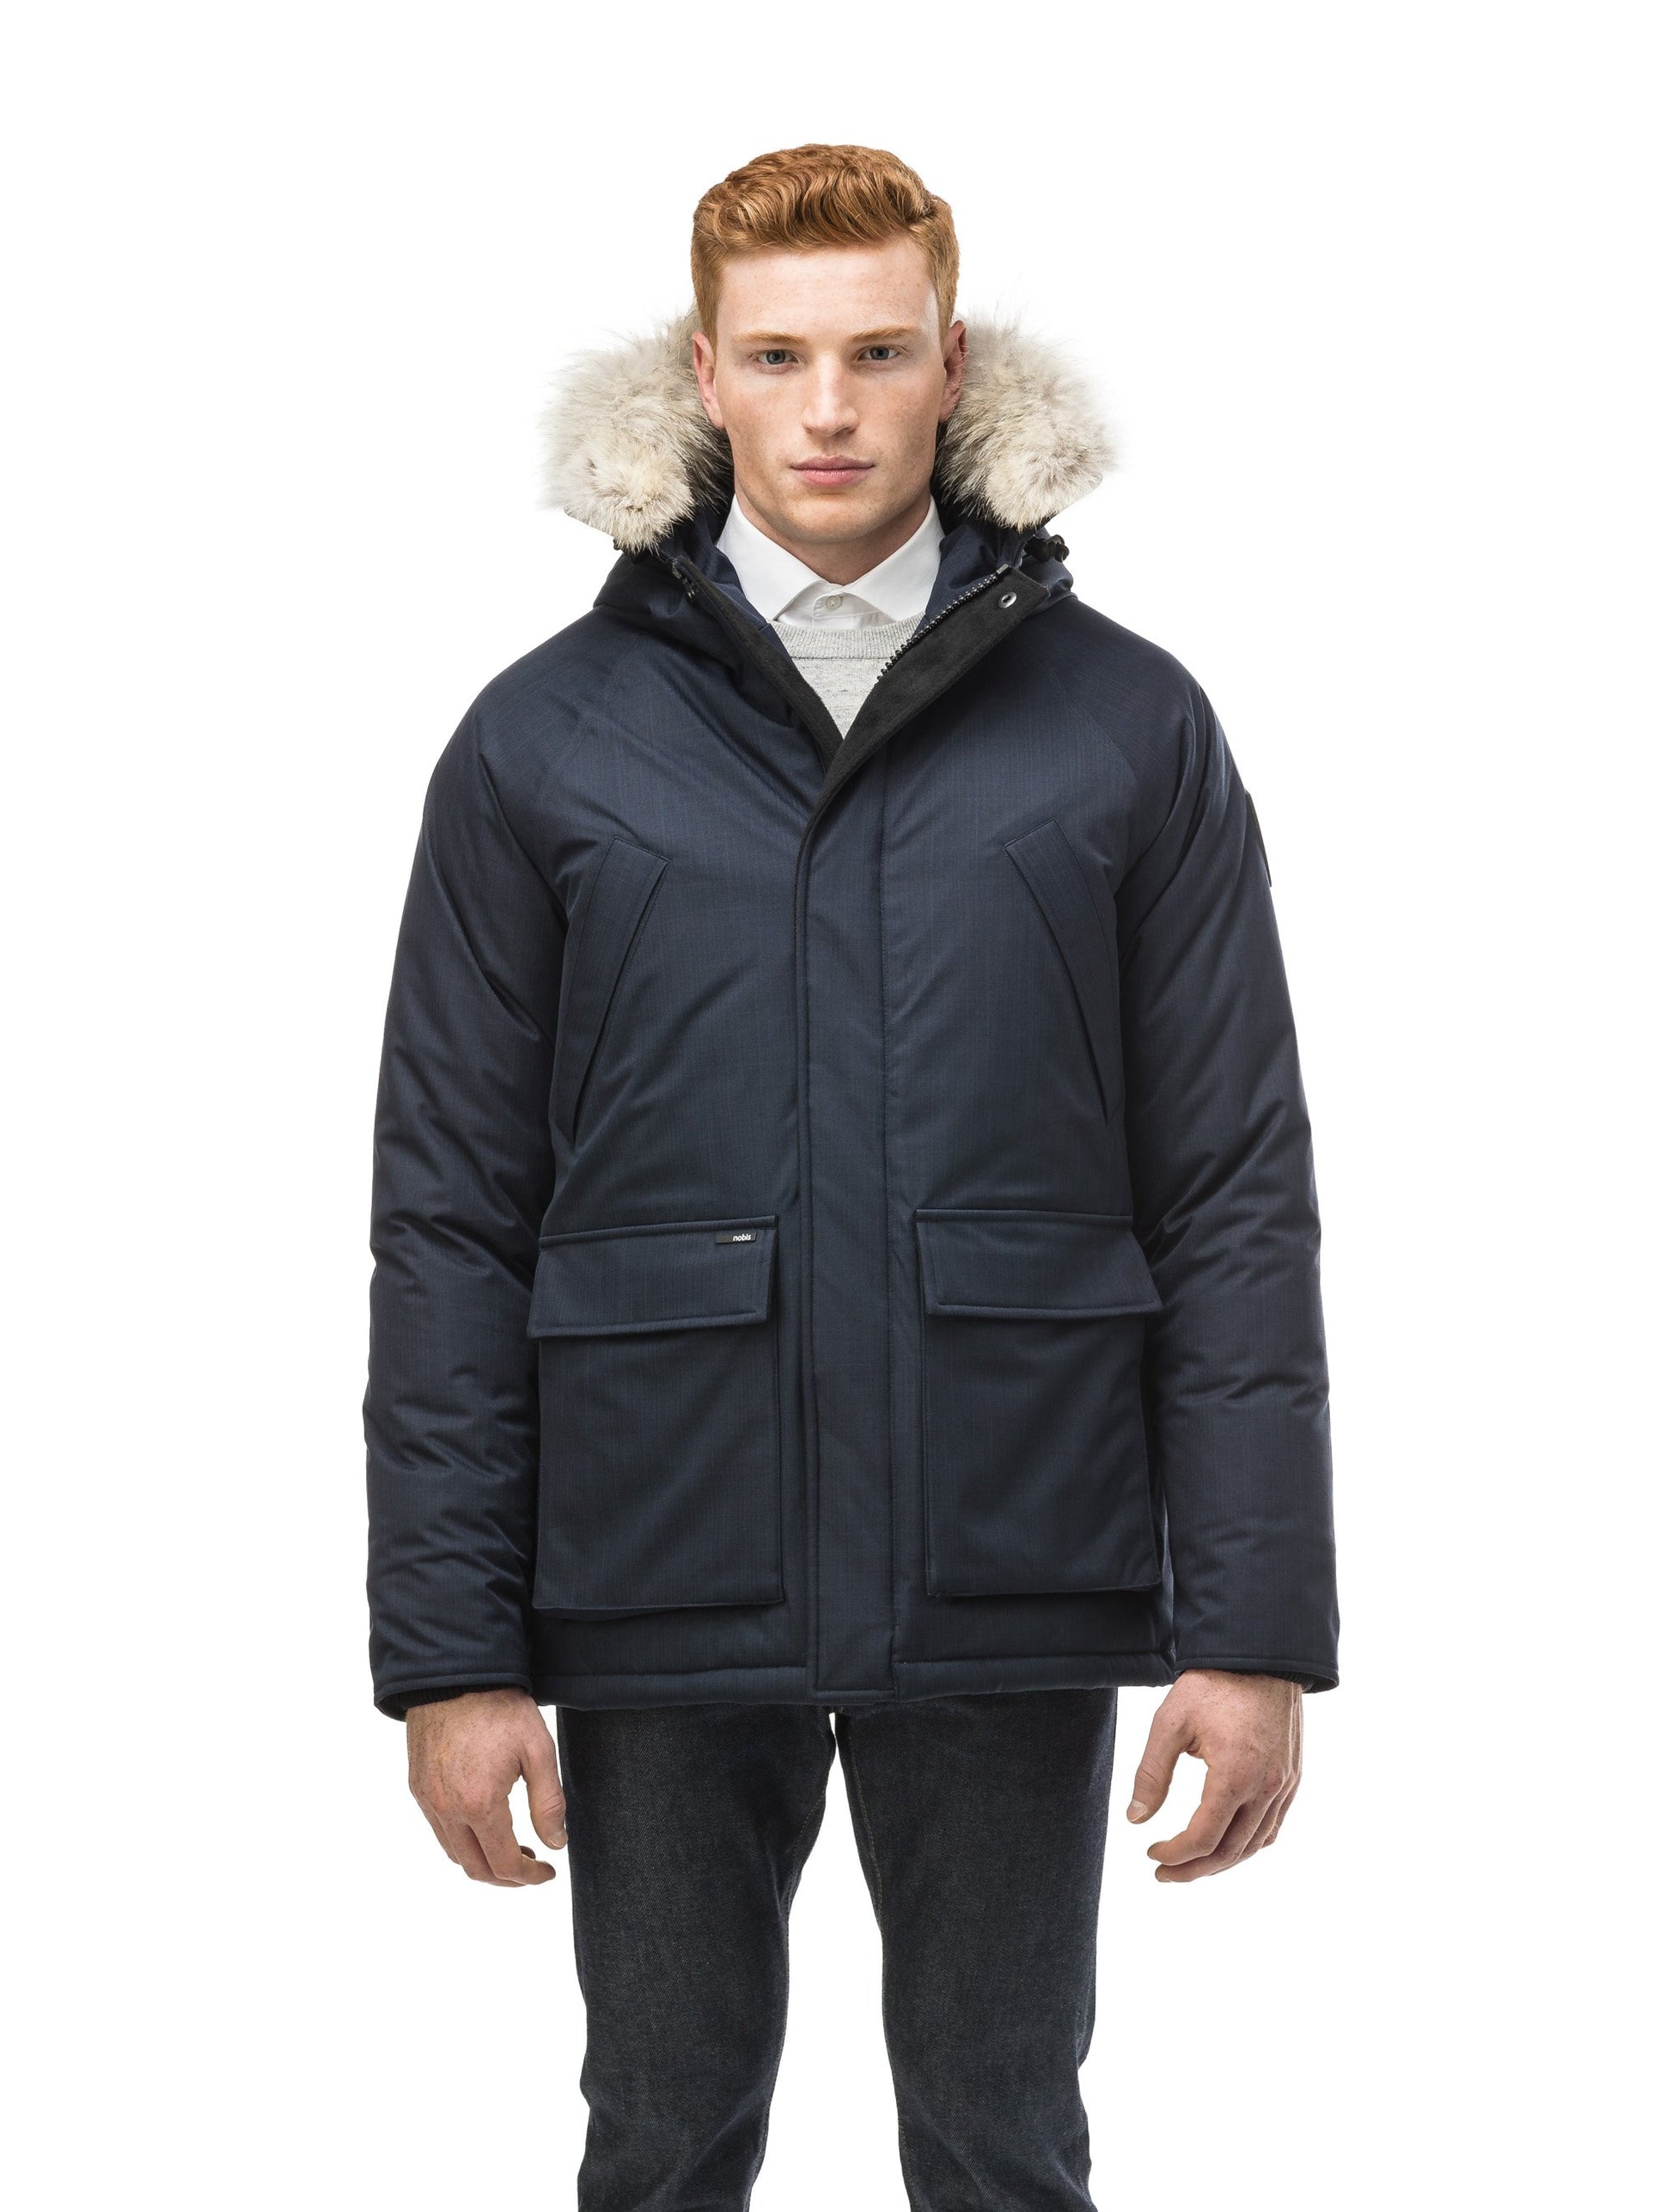 Men's waist length down filled jacket with two front pockets with magnetic closure and a removable fur trim on the hood in CH Navy